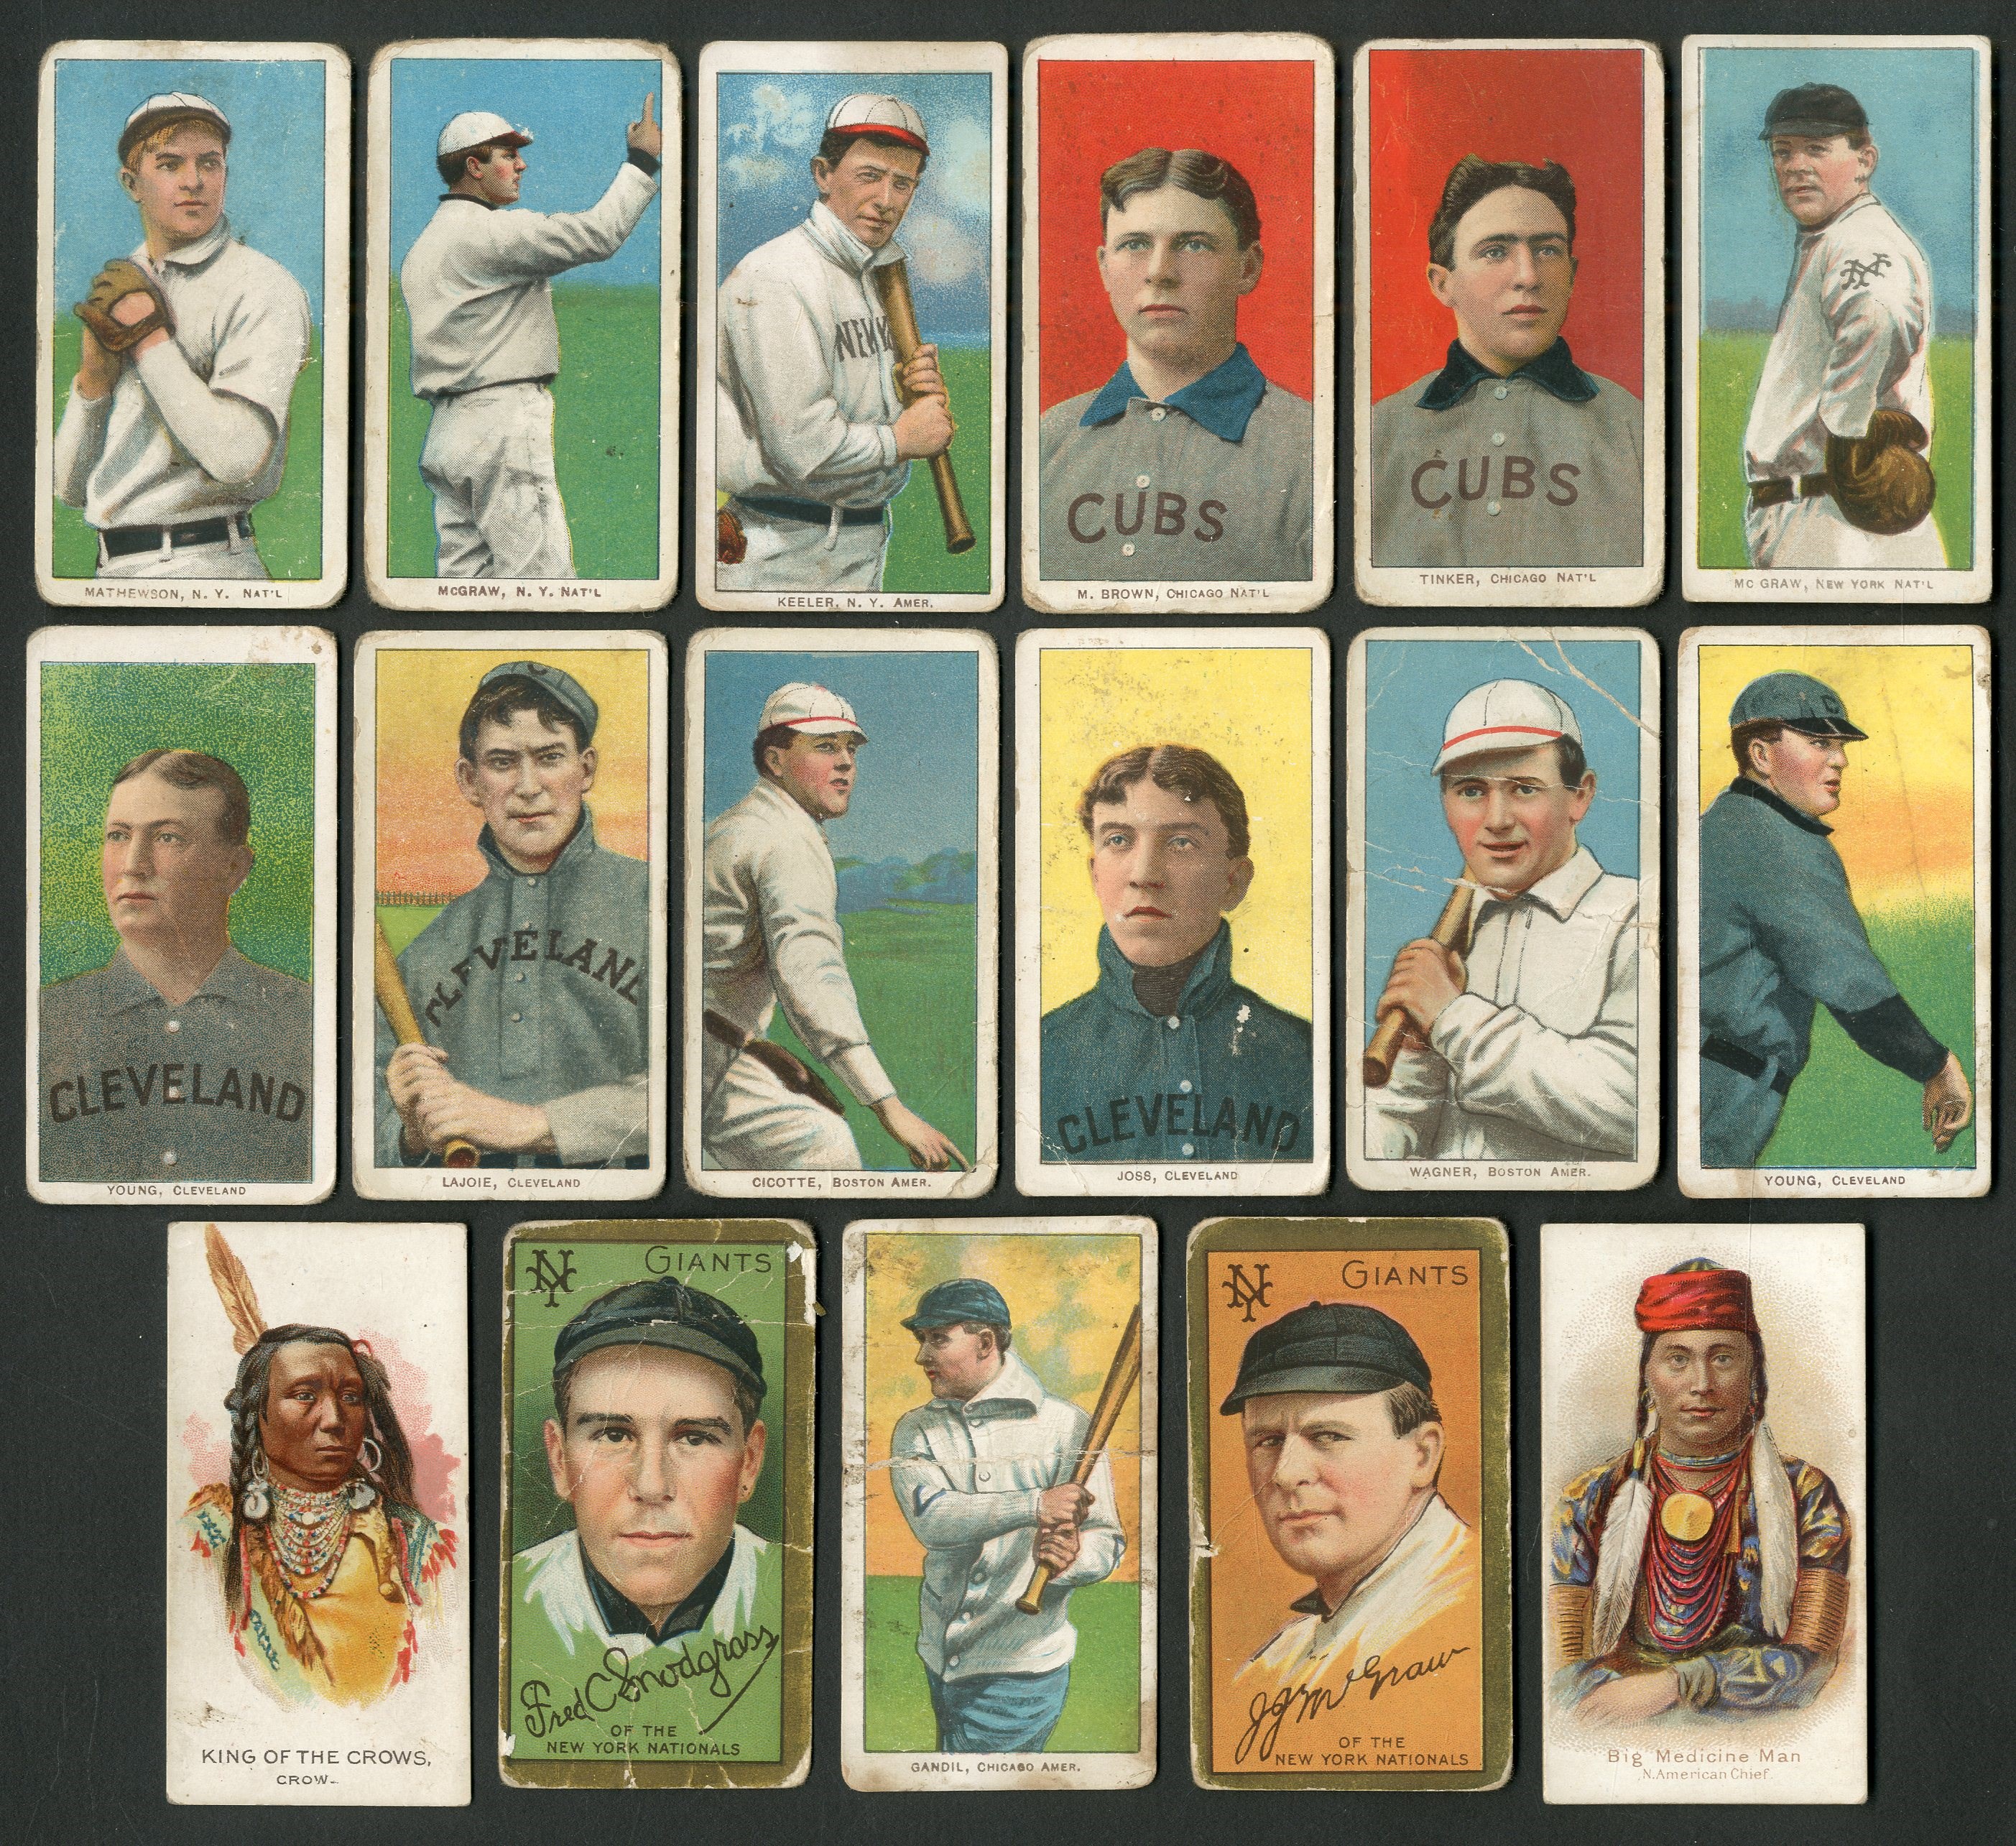 Baseball and Trading Cards - Tobacco Card Collection Featuring T206's with Soverign Backs (225+ cards)